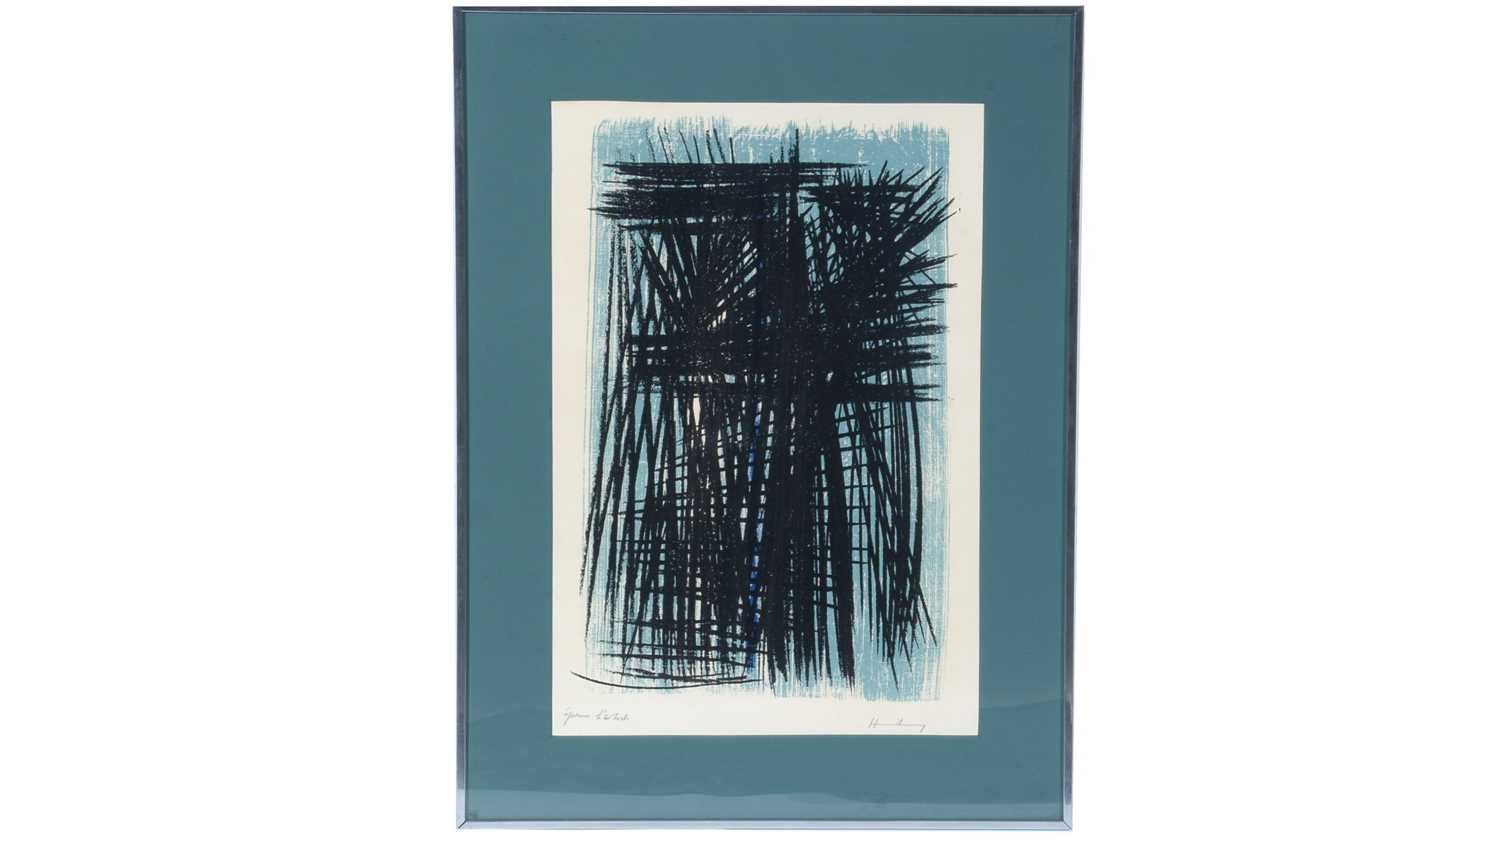 Lot 156 - Hans Hartung - Linear Cluster | artist's proof lithograph